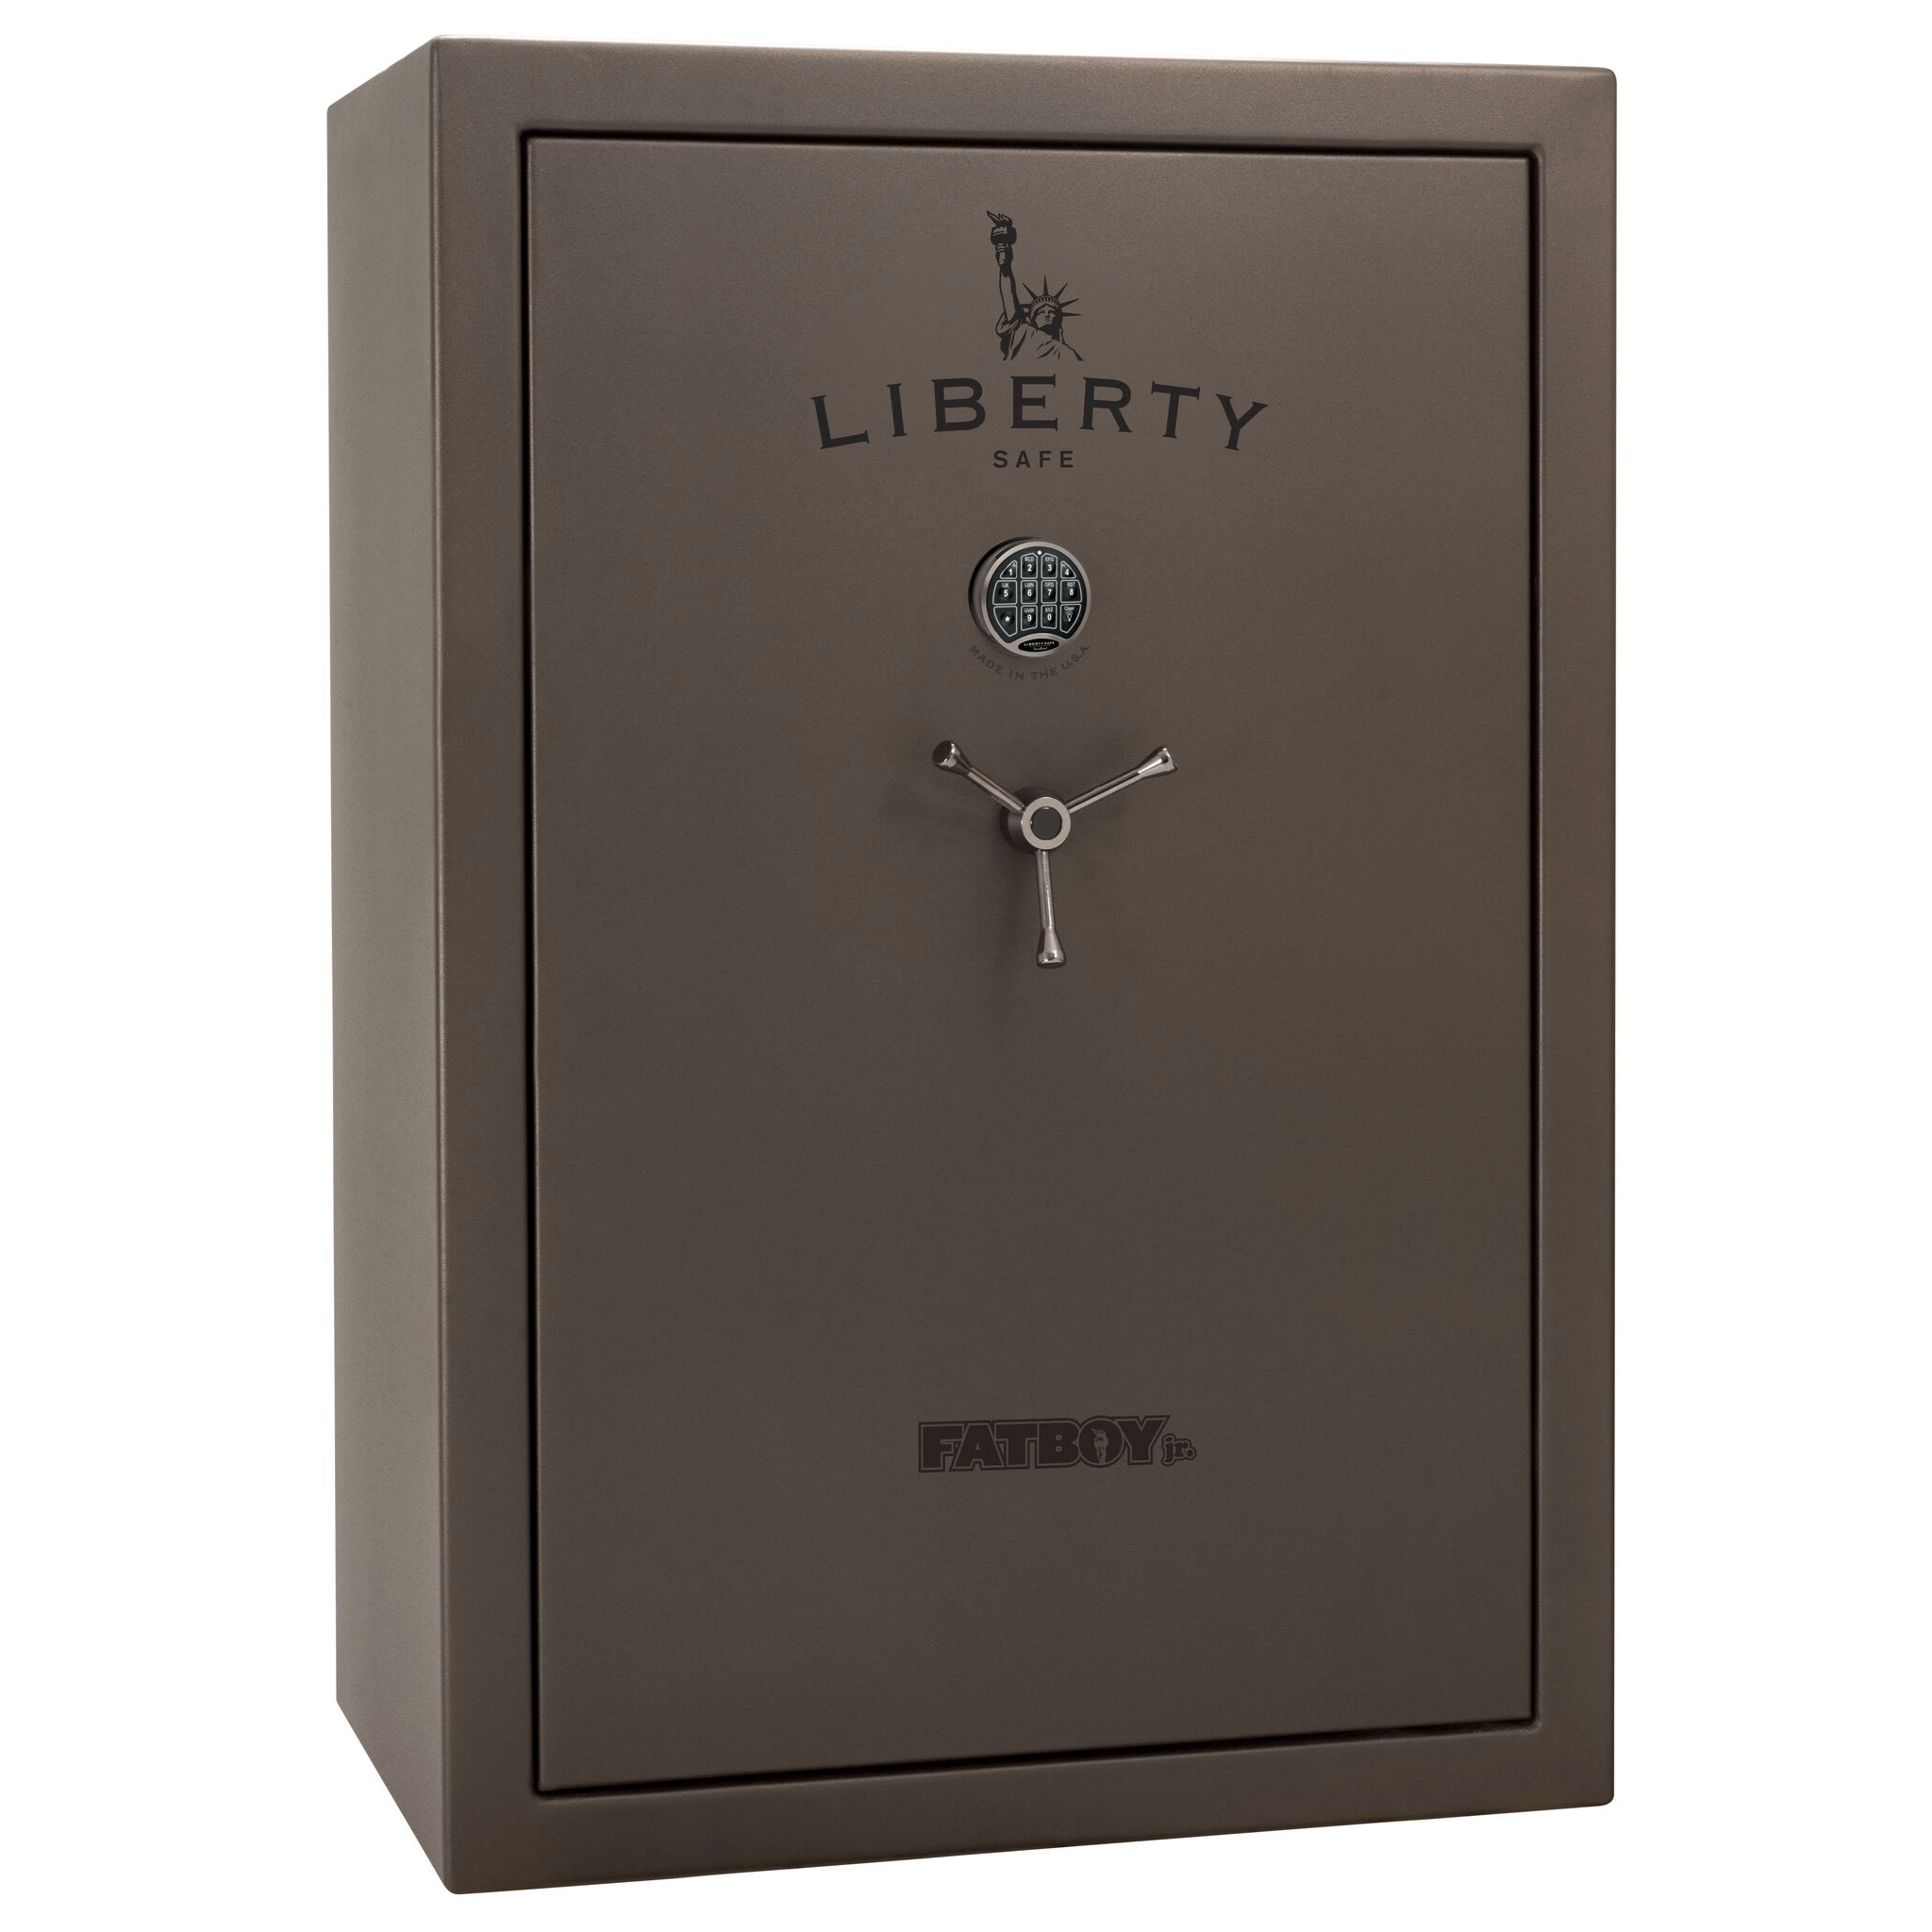 Fatboy Jr. Series | Level 3 Security | 75 Minute Fire Protection | 48XT | Dimensions: 60.5"(H) x 42"(W) x 25"(D) | Extreme 6 in 1 Flex Interior | Black Textured | Electronic Lock, photo 25